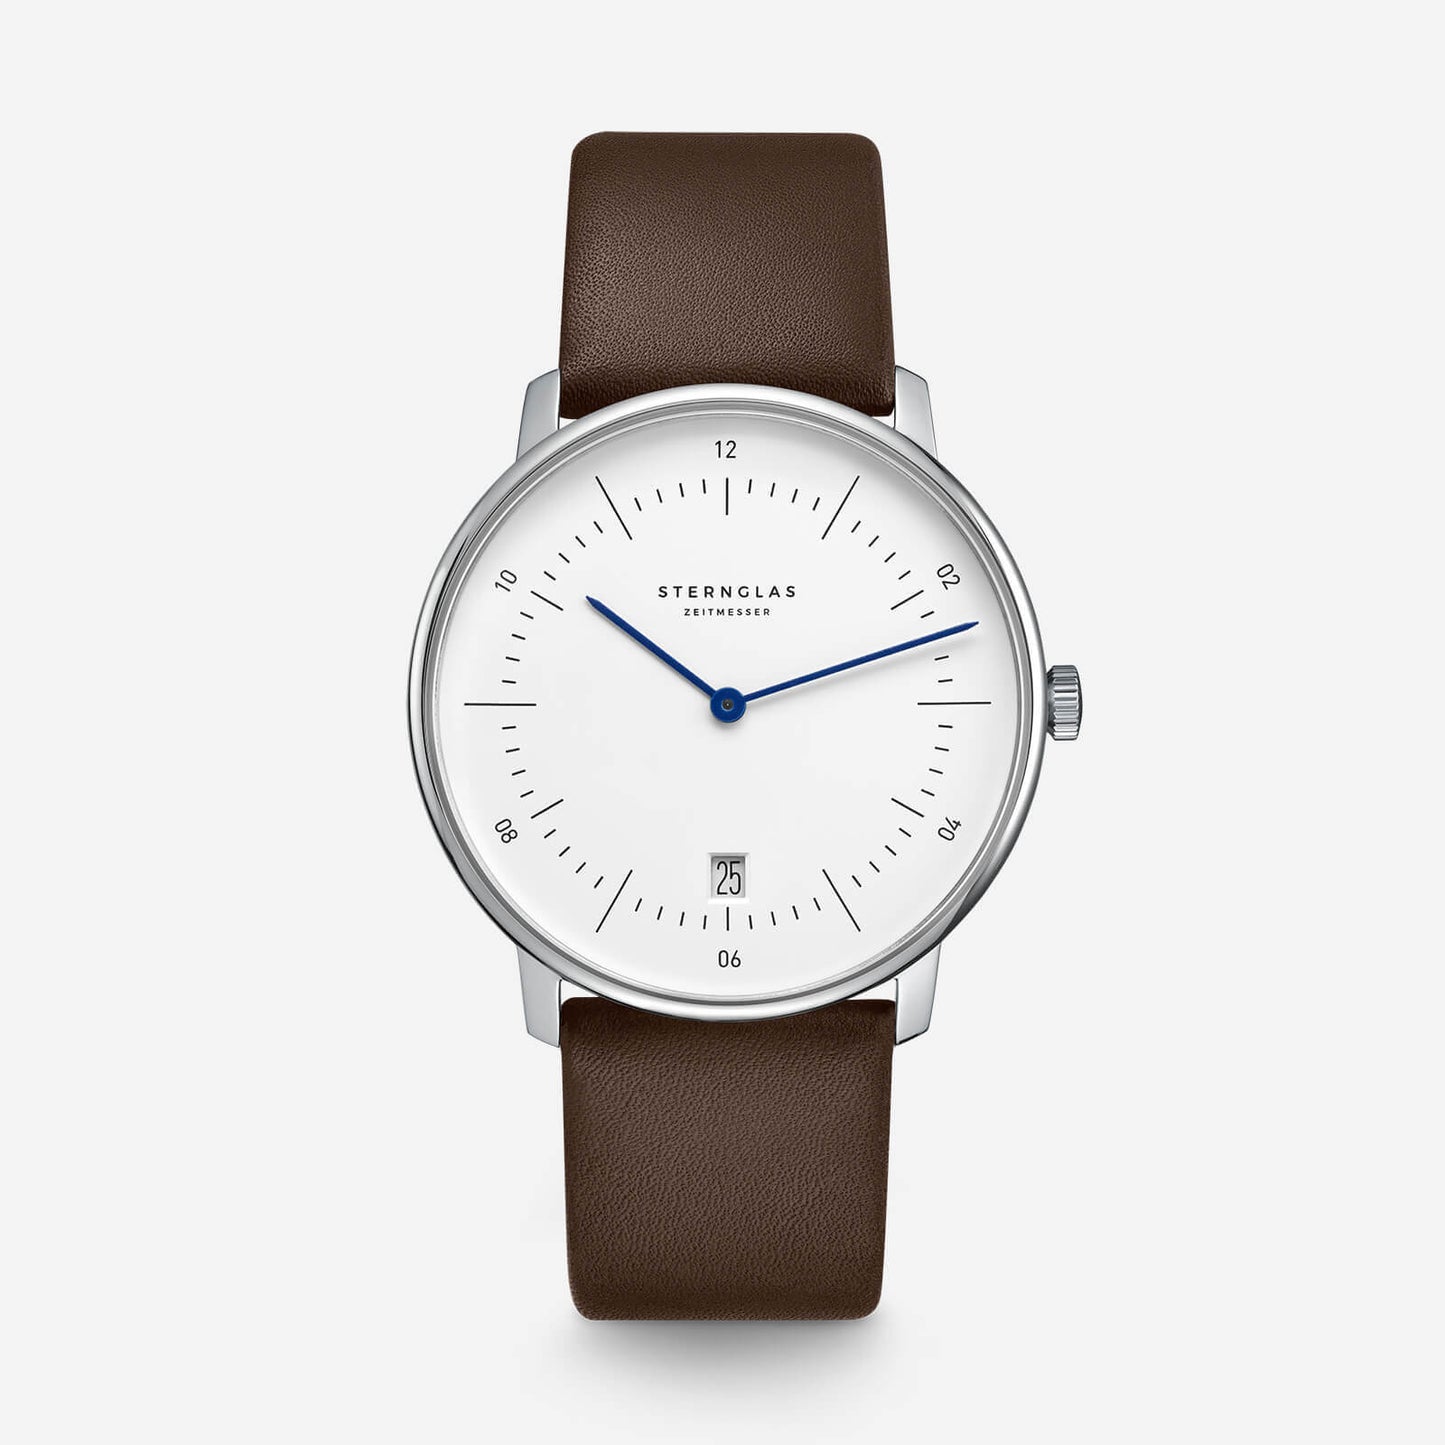 popup|Classic Bauhaus Design|Inspired by the Bauhaus movement of the 1920s, the dial is kept minimalistic and clear. "Form follows function" as they say.